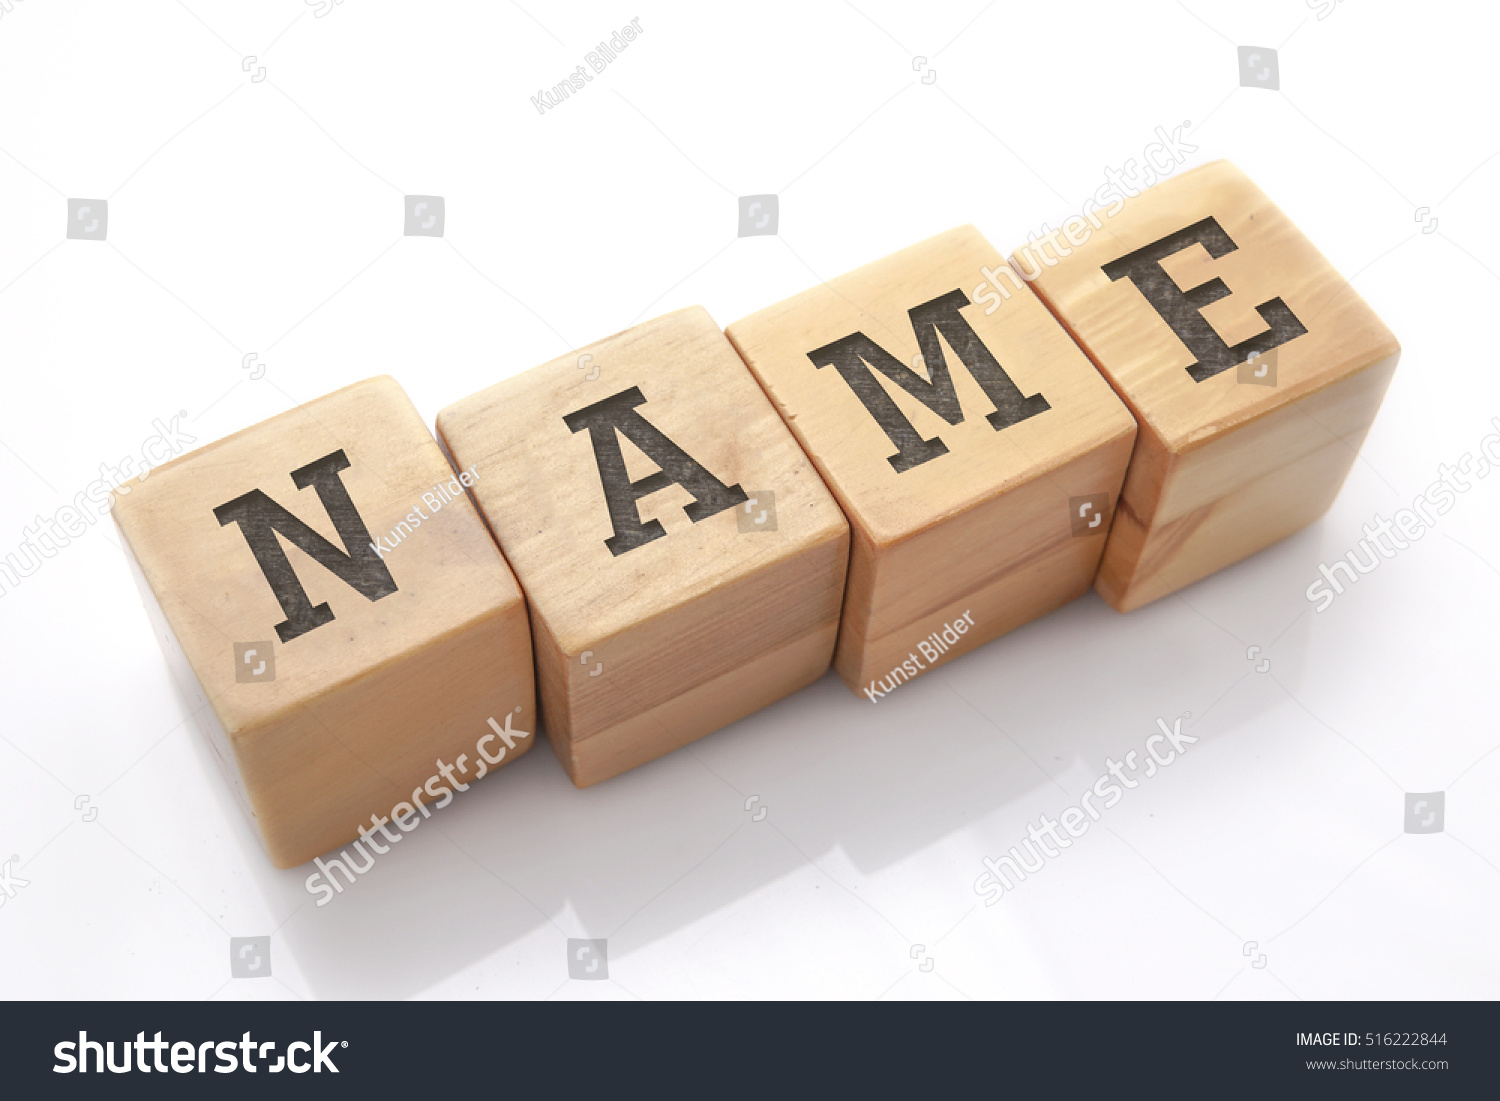 NAME word made with building blocks isolated on white #516222844